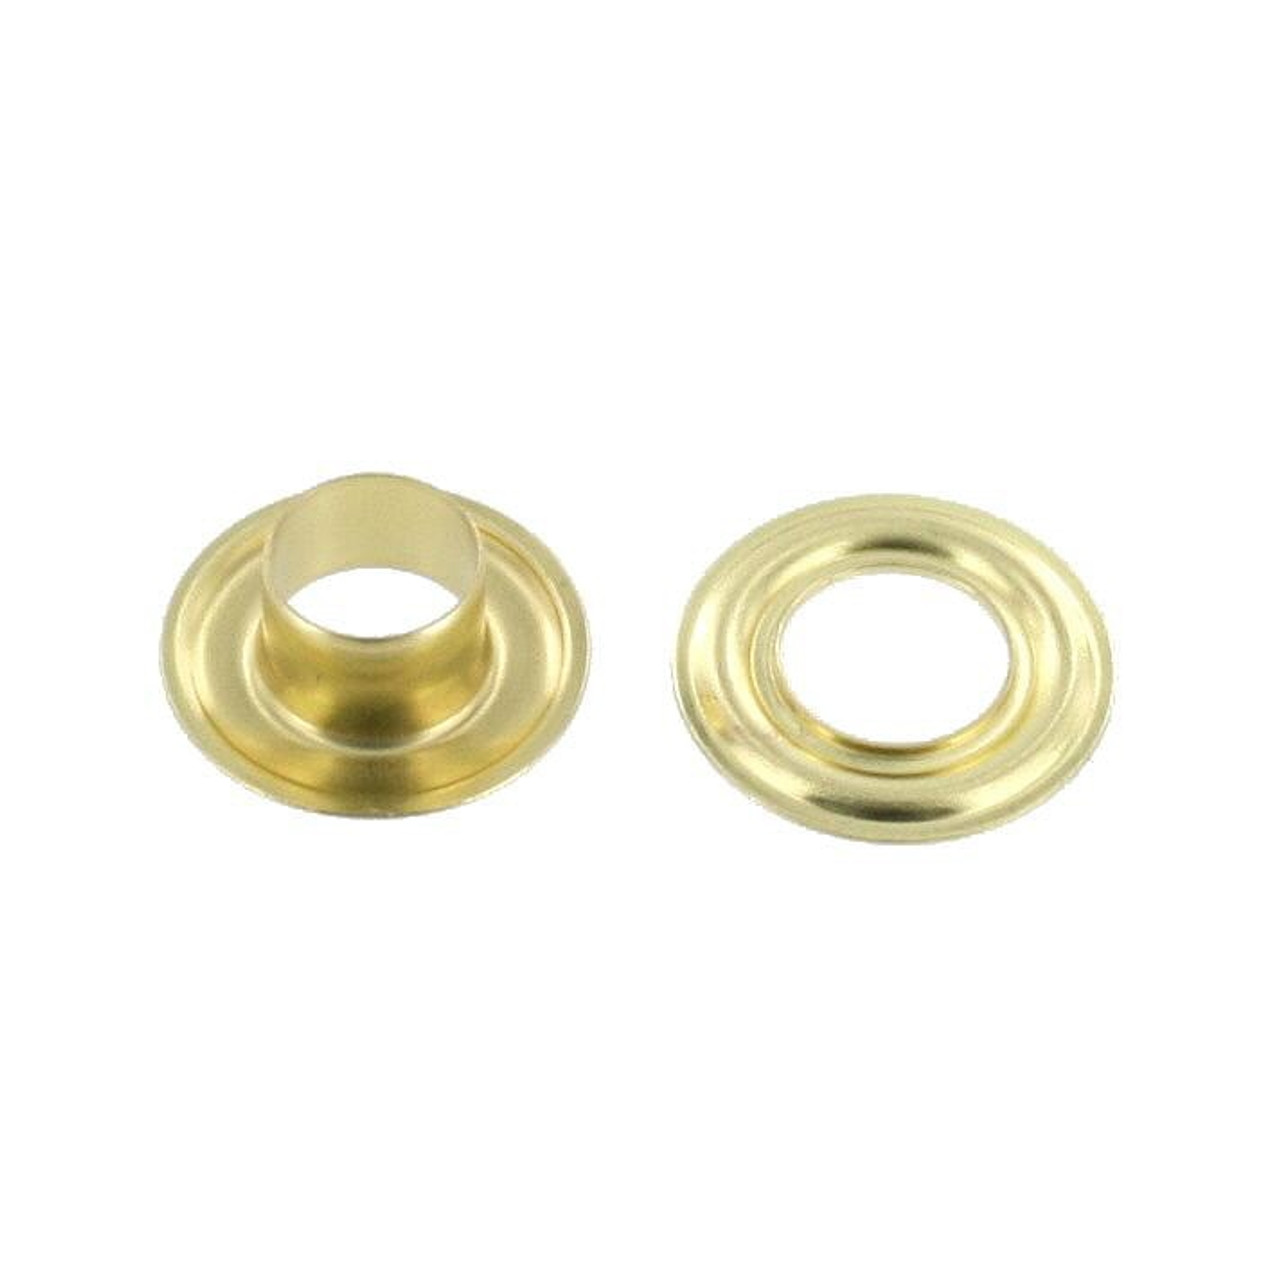 100pc. Bulk-pack 7/8-inch Brass Grommets/Candle Cups - C. B. Gitty